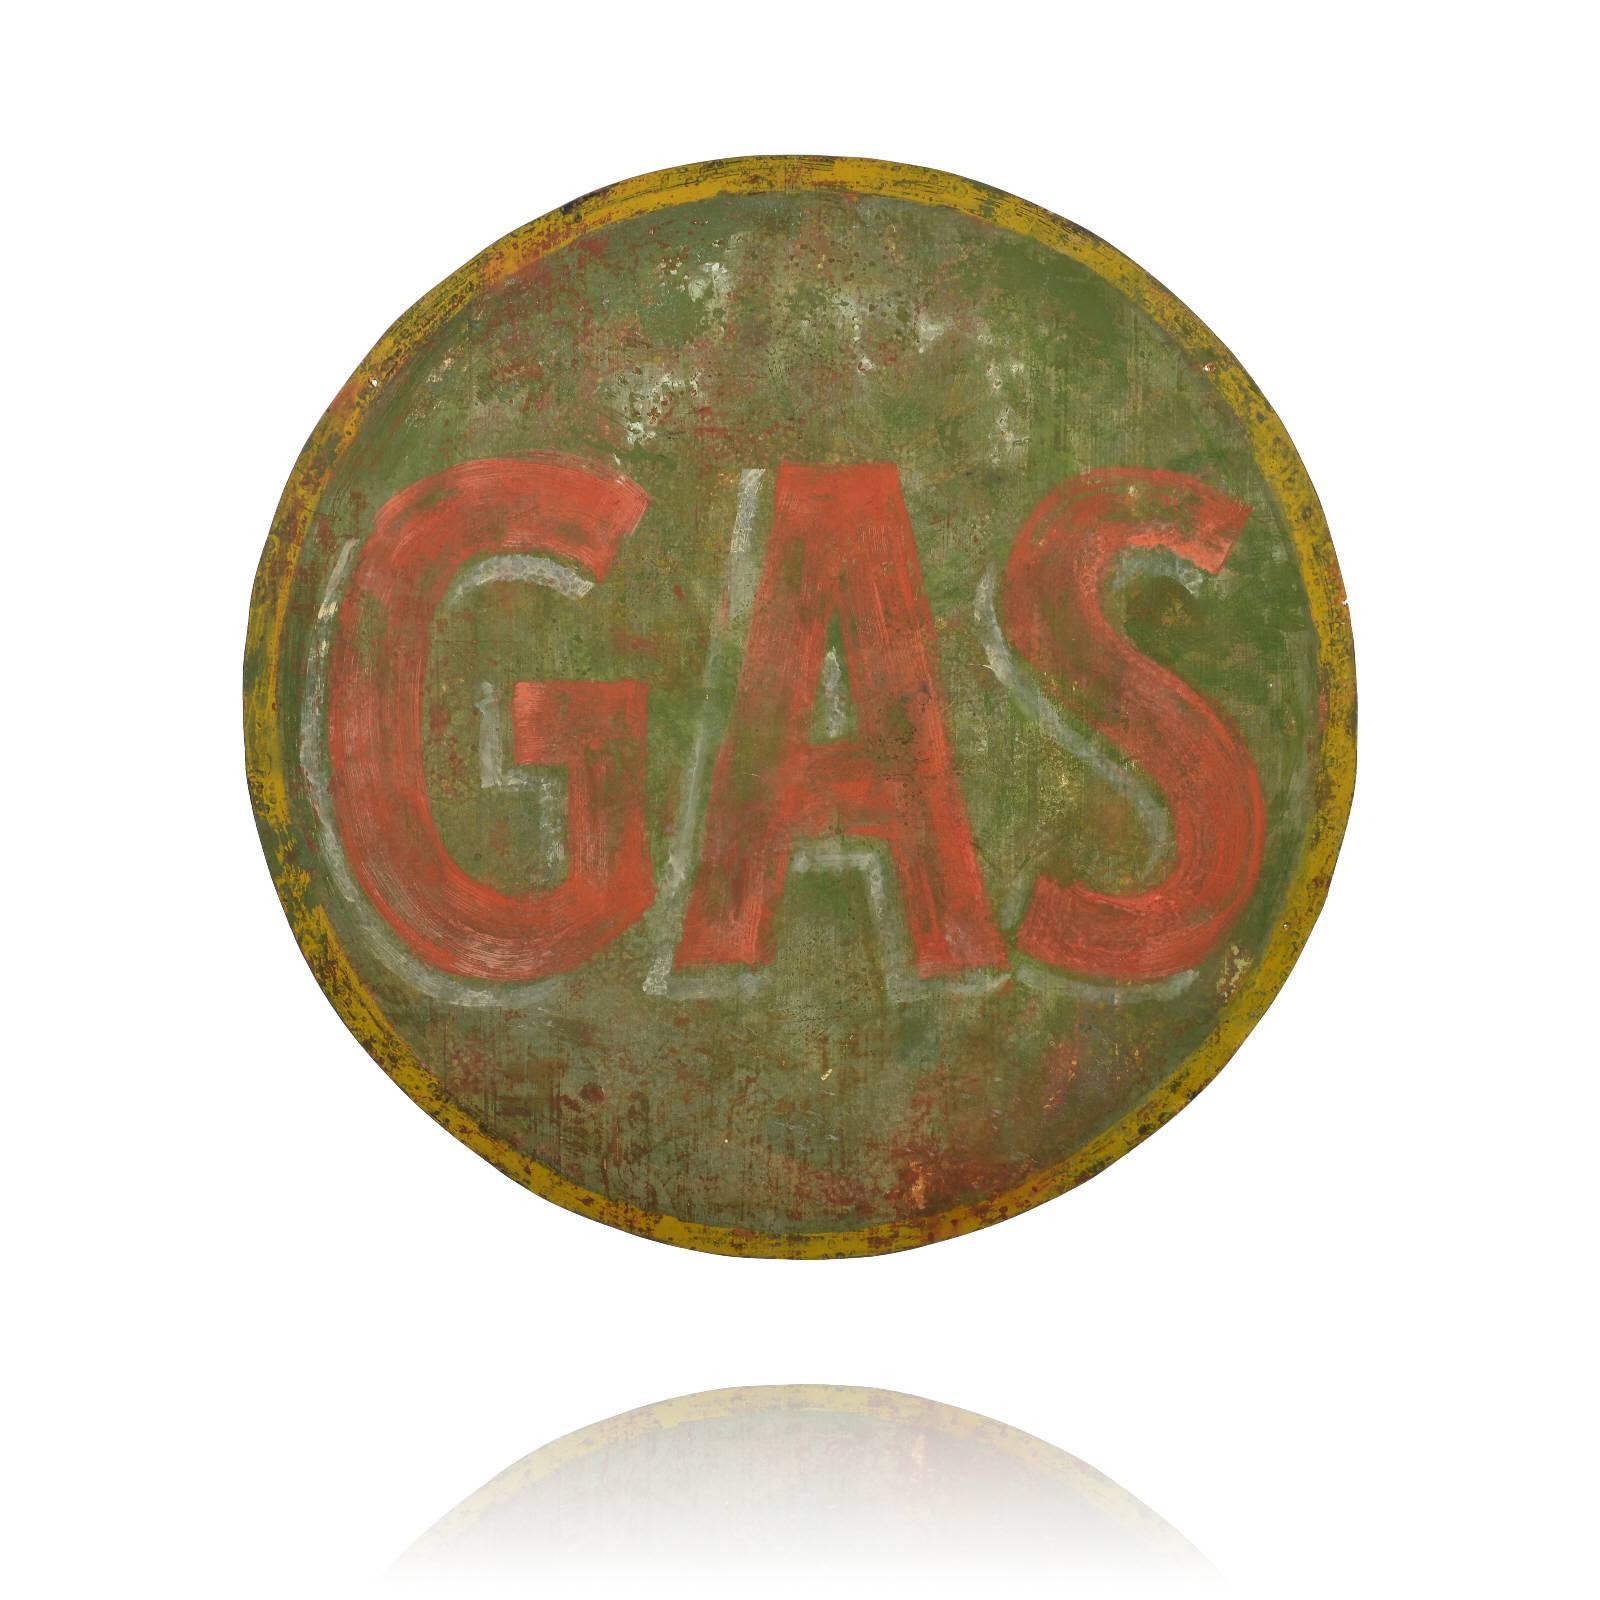 This is a large round GAS sign that was made of wood and is all hand-painted. It has the appearance of an old weathered sign from a gas station, but was more likely made for a TV or movie set as a prop. Extremely well done, this piece would be right